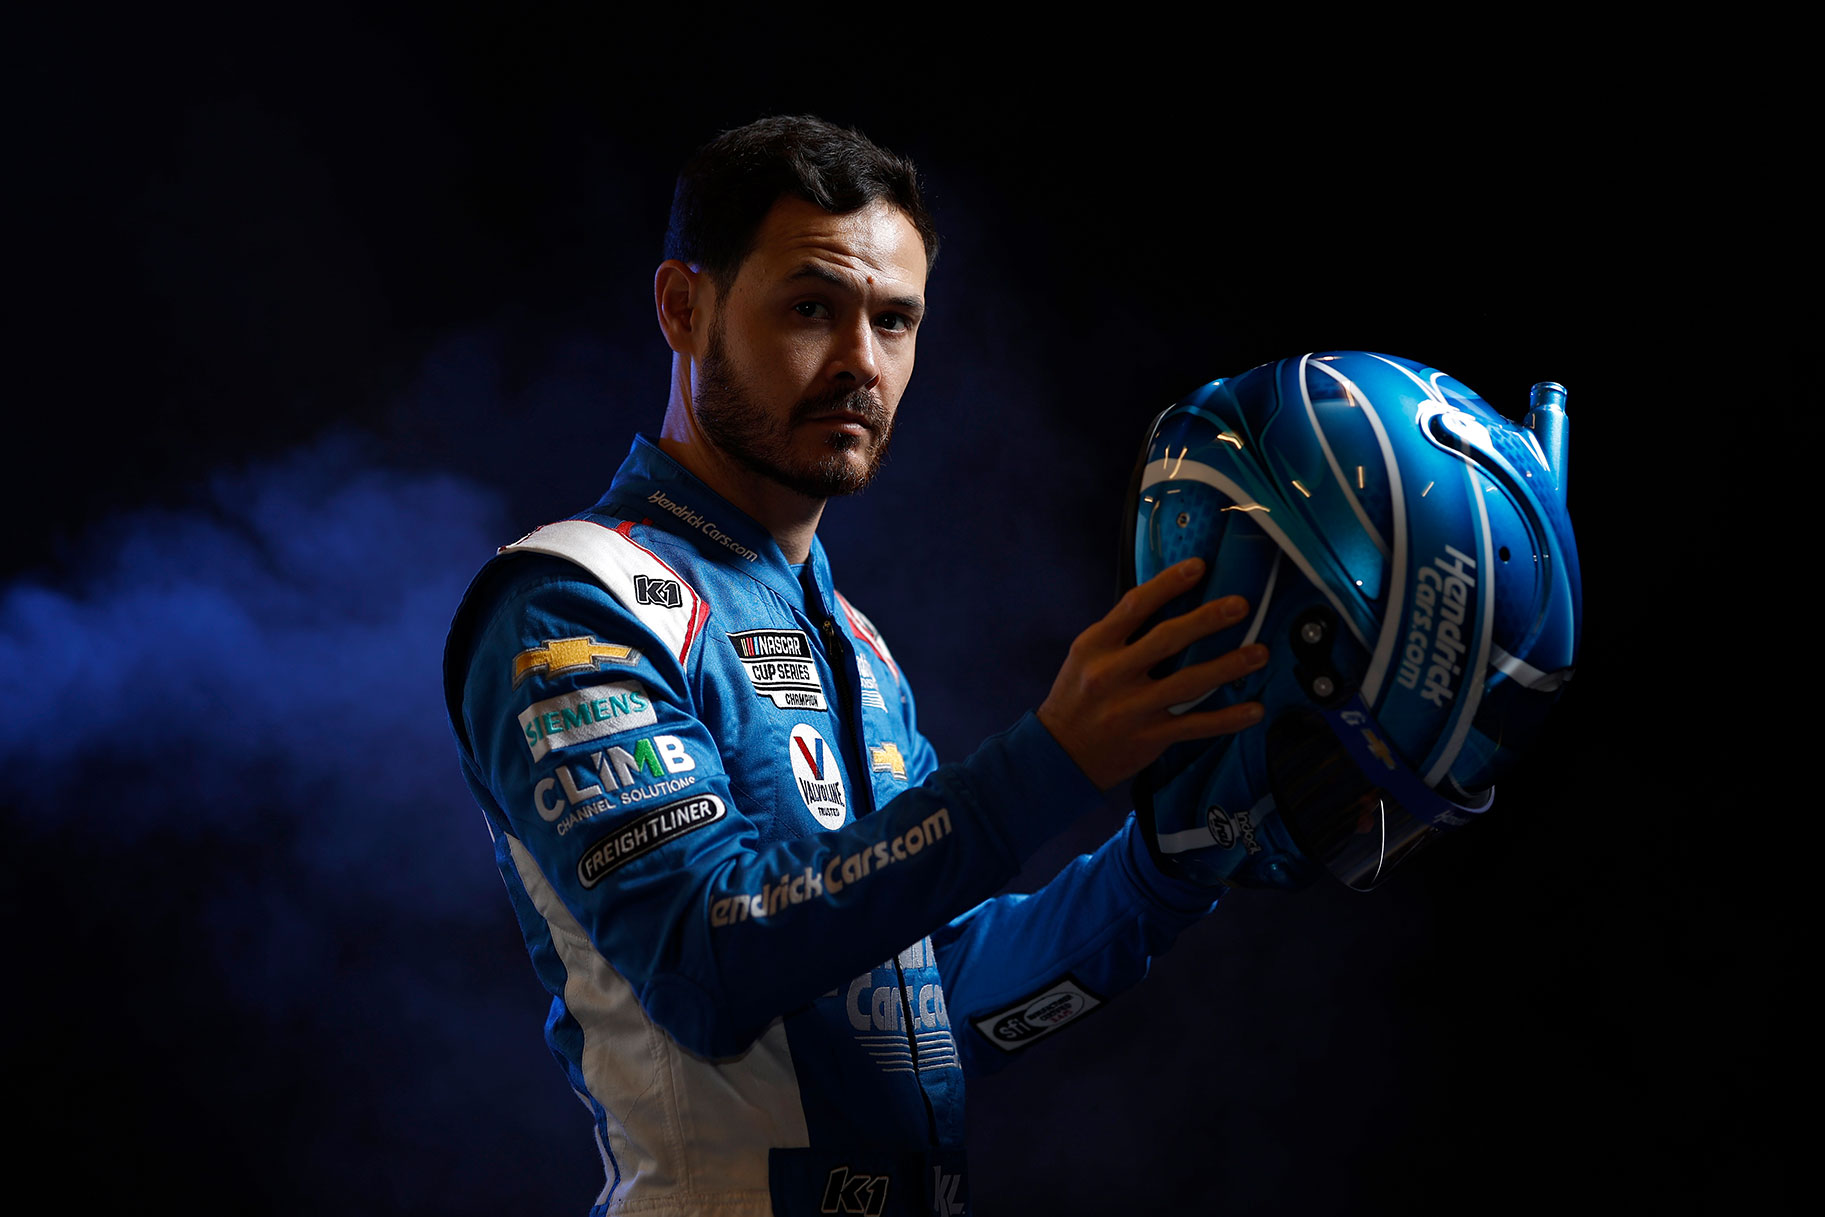 Kyle Larson photographed with his helmet in his hands